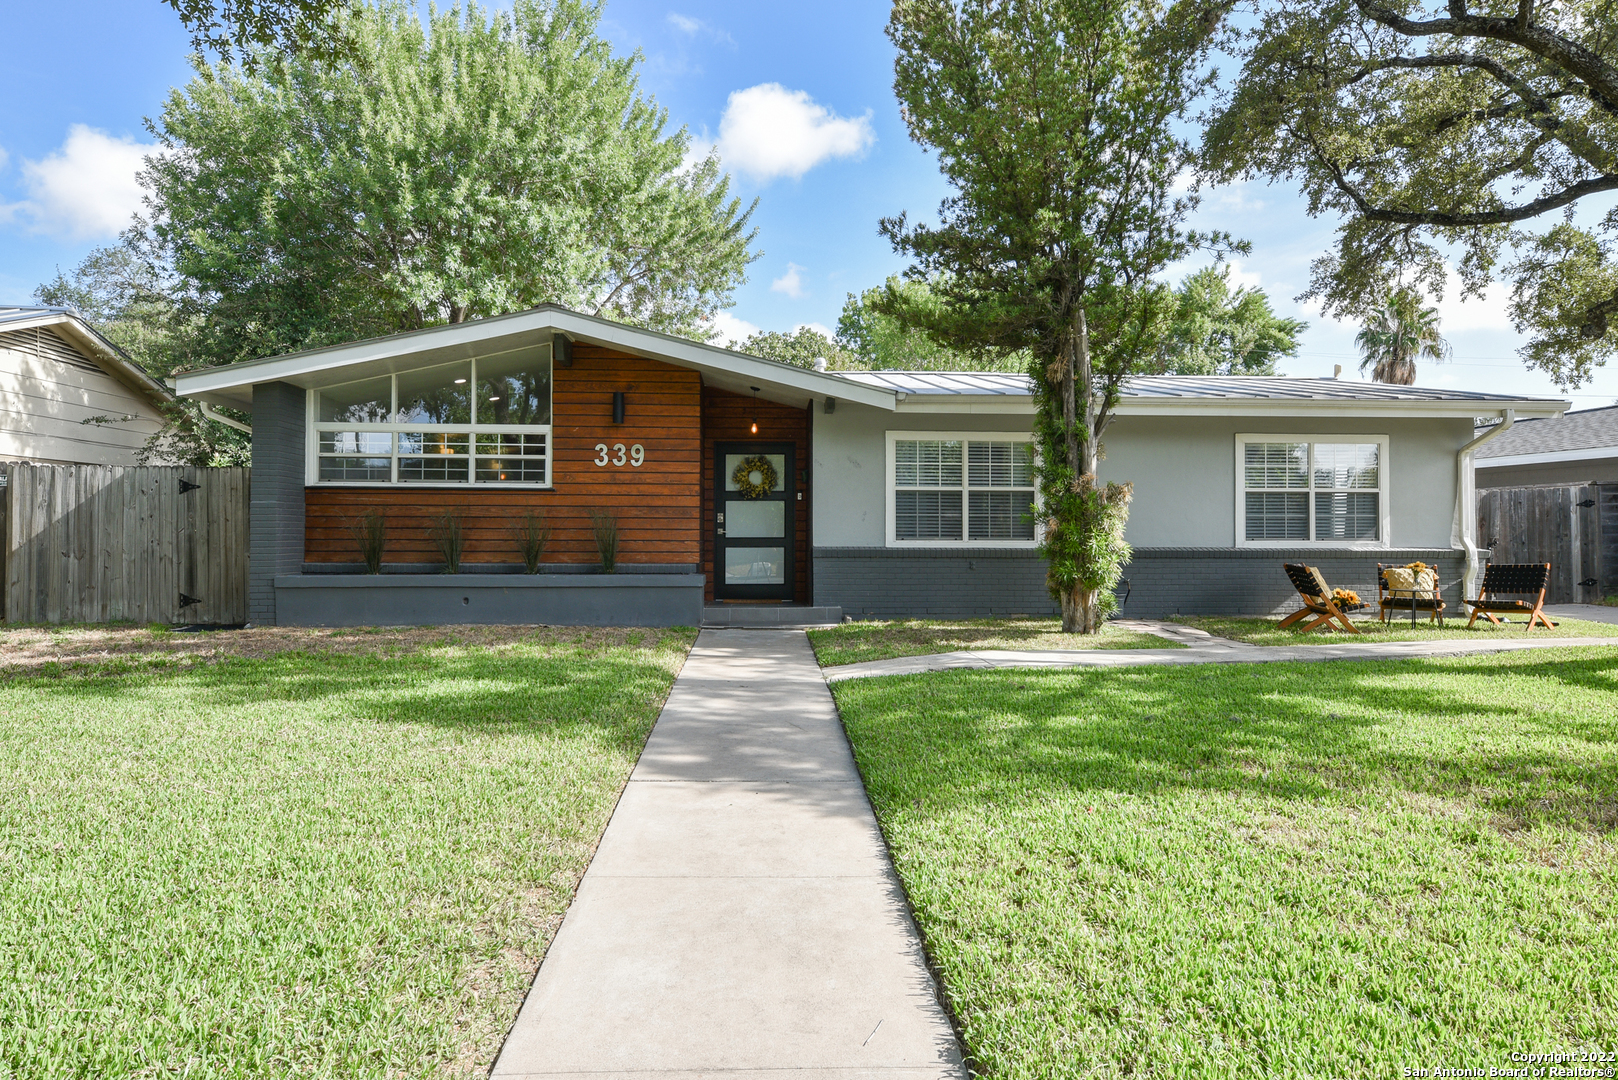 **OPEN HOUSE: Friday, 11/11/22. 4-6PM & Saturday, 11/12/22, 11AM-2PM**  Offering multiple finance options, 2-1 Buydown or VA Assumable loan*, this stunning mid-century modern is located in desirable Alamo Heights ISD and on one of the loveliest streets in Northridge. Updated with emphasis on a classic easy living style. The Master Suite addition, with a full bath and huge walk-in closet, completes this exceptional property consisting of a total of 4 bedrooms and 3 full baths. The spacious kitchen features quartz countertops, gas cooking, and stainless steel appliances. (All appliances convey.) The art-deco marble tiled fireplace showcases the spacious and inviting living room.  Beautiful inside and out with many upgrades and improvements, including tankless water heaters & 18 Seer HVAC units, and, more...  The location cannot be beaten:  schools within walking distance, upscale shopping, and entertainment within blocks. Note: All major appliances convey.  *Certain terms apply.